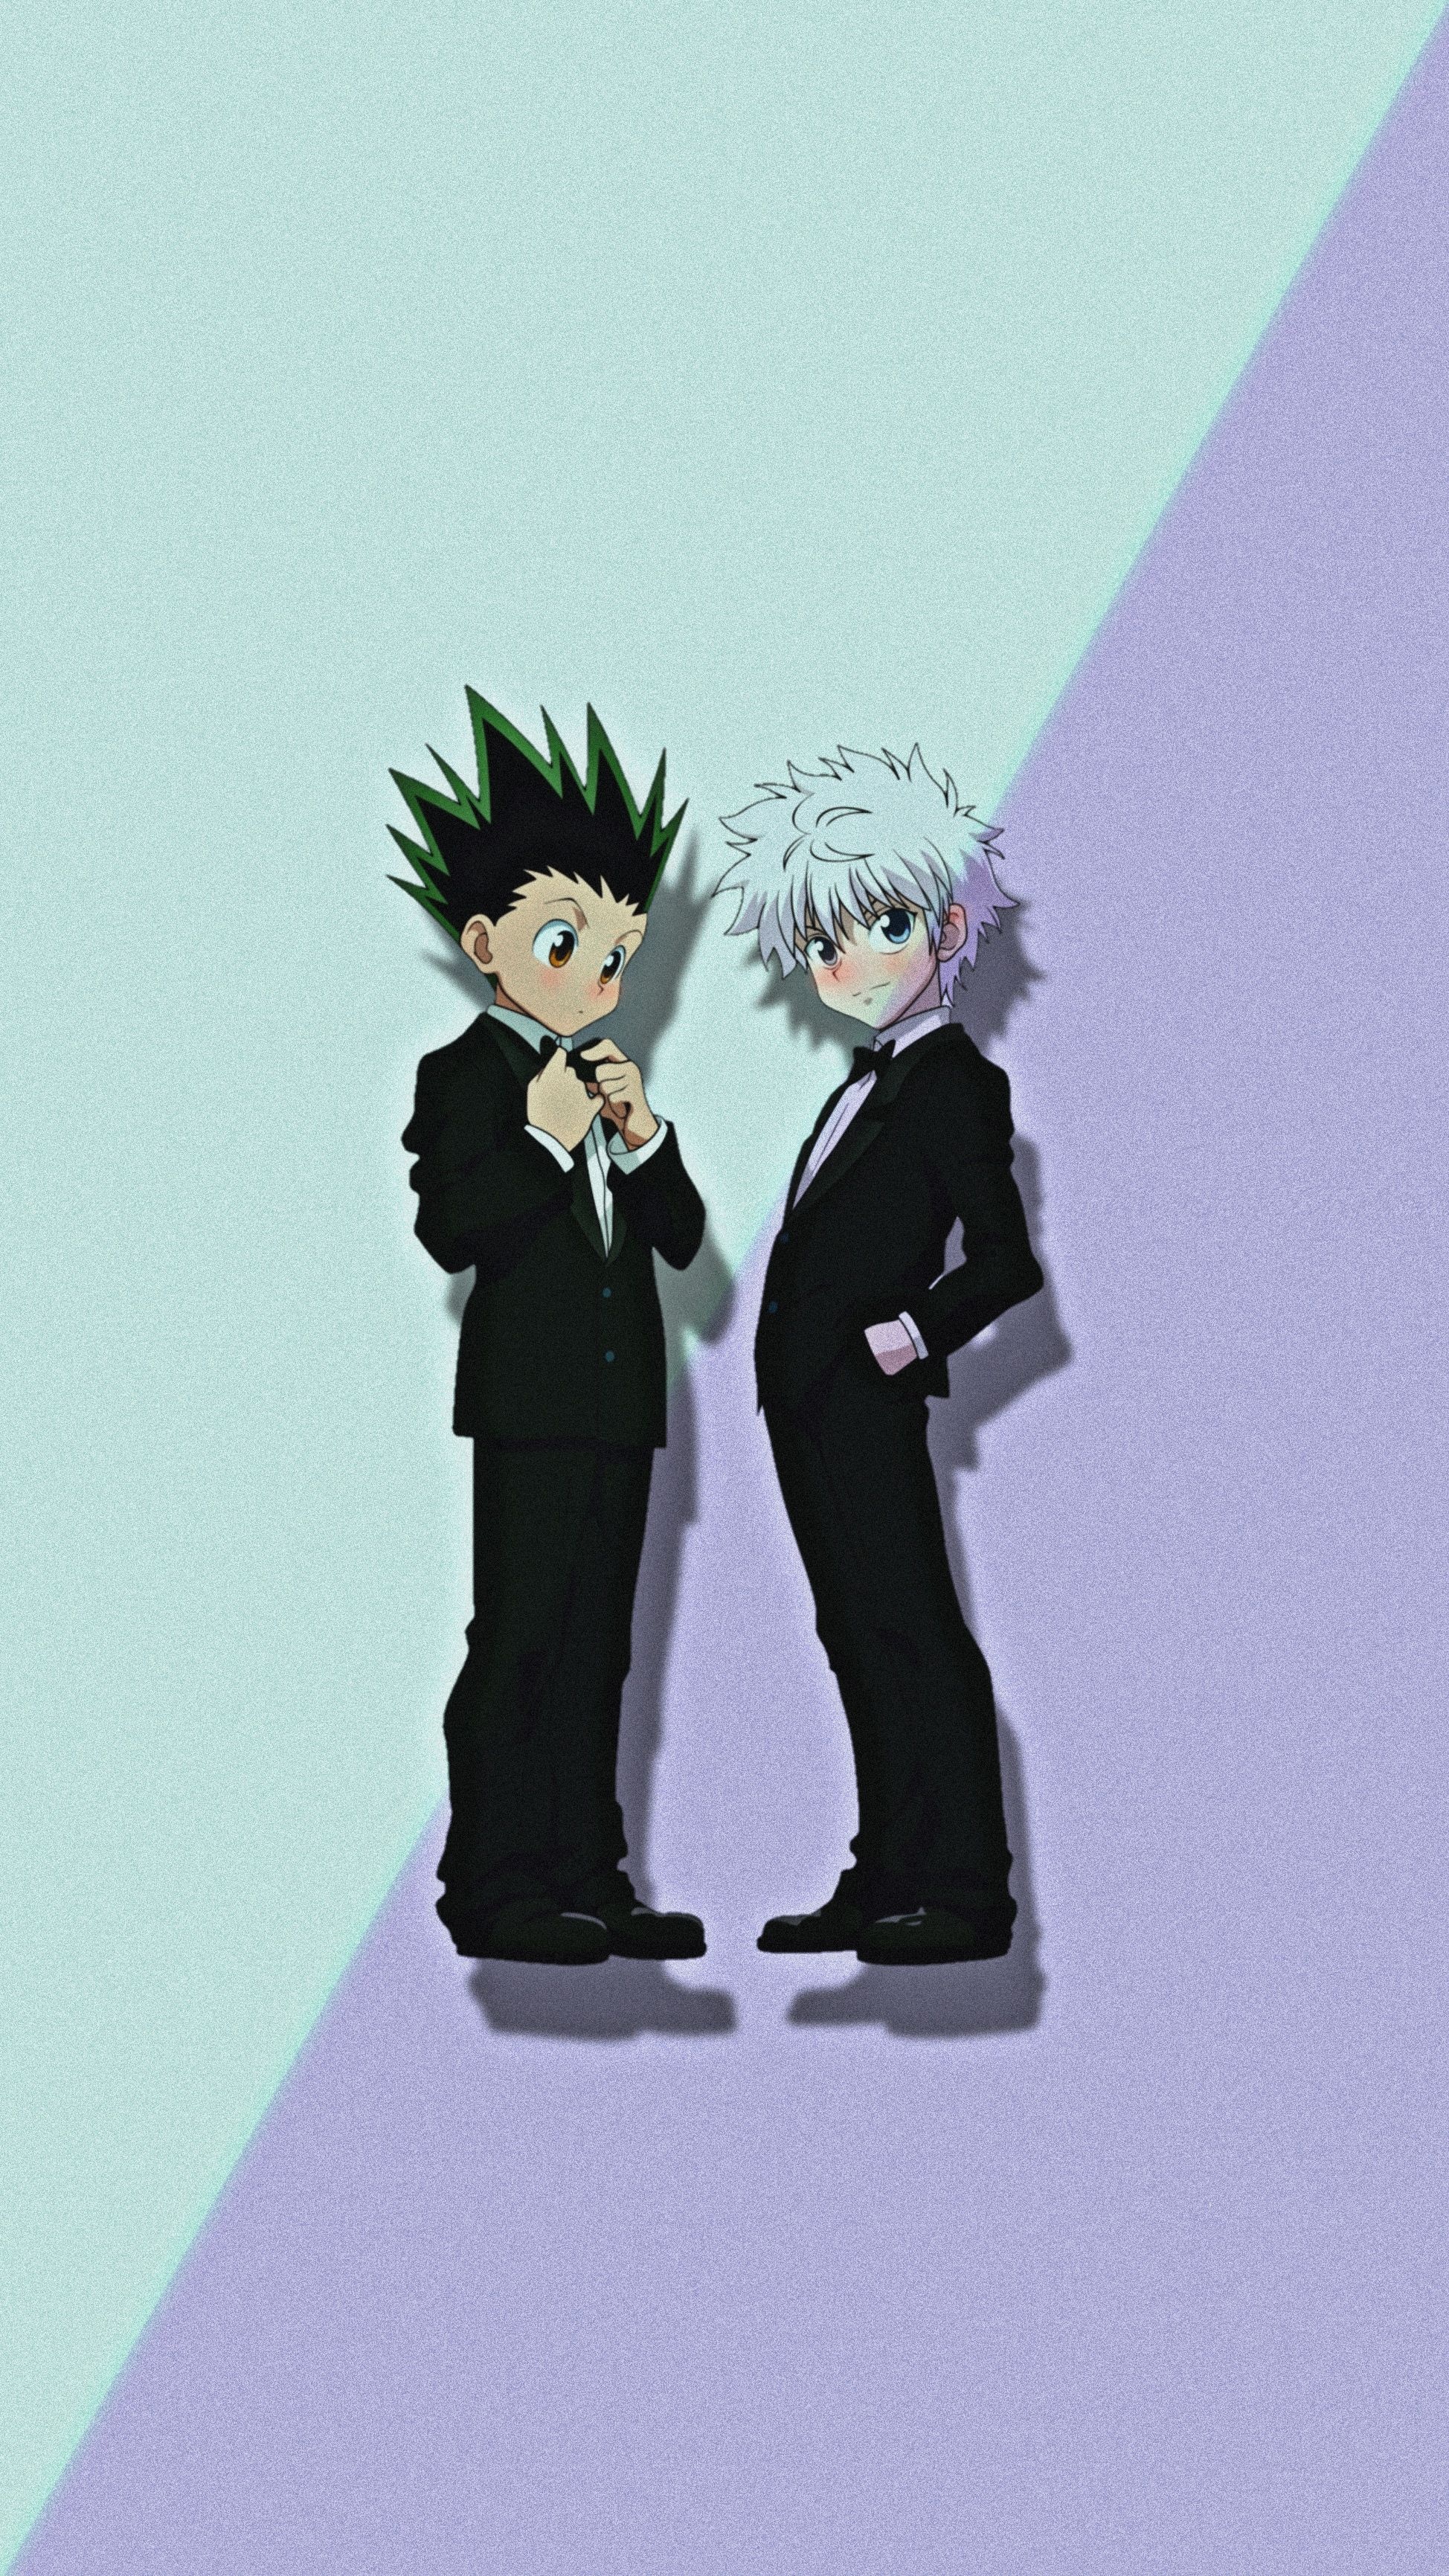 Gon and Killua: A Rookie Hunter and the son of Ging Freecss, The third child of Silva and Kikyo Zoldyck. 1950x3470 HD Background.